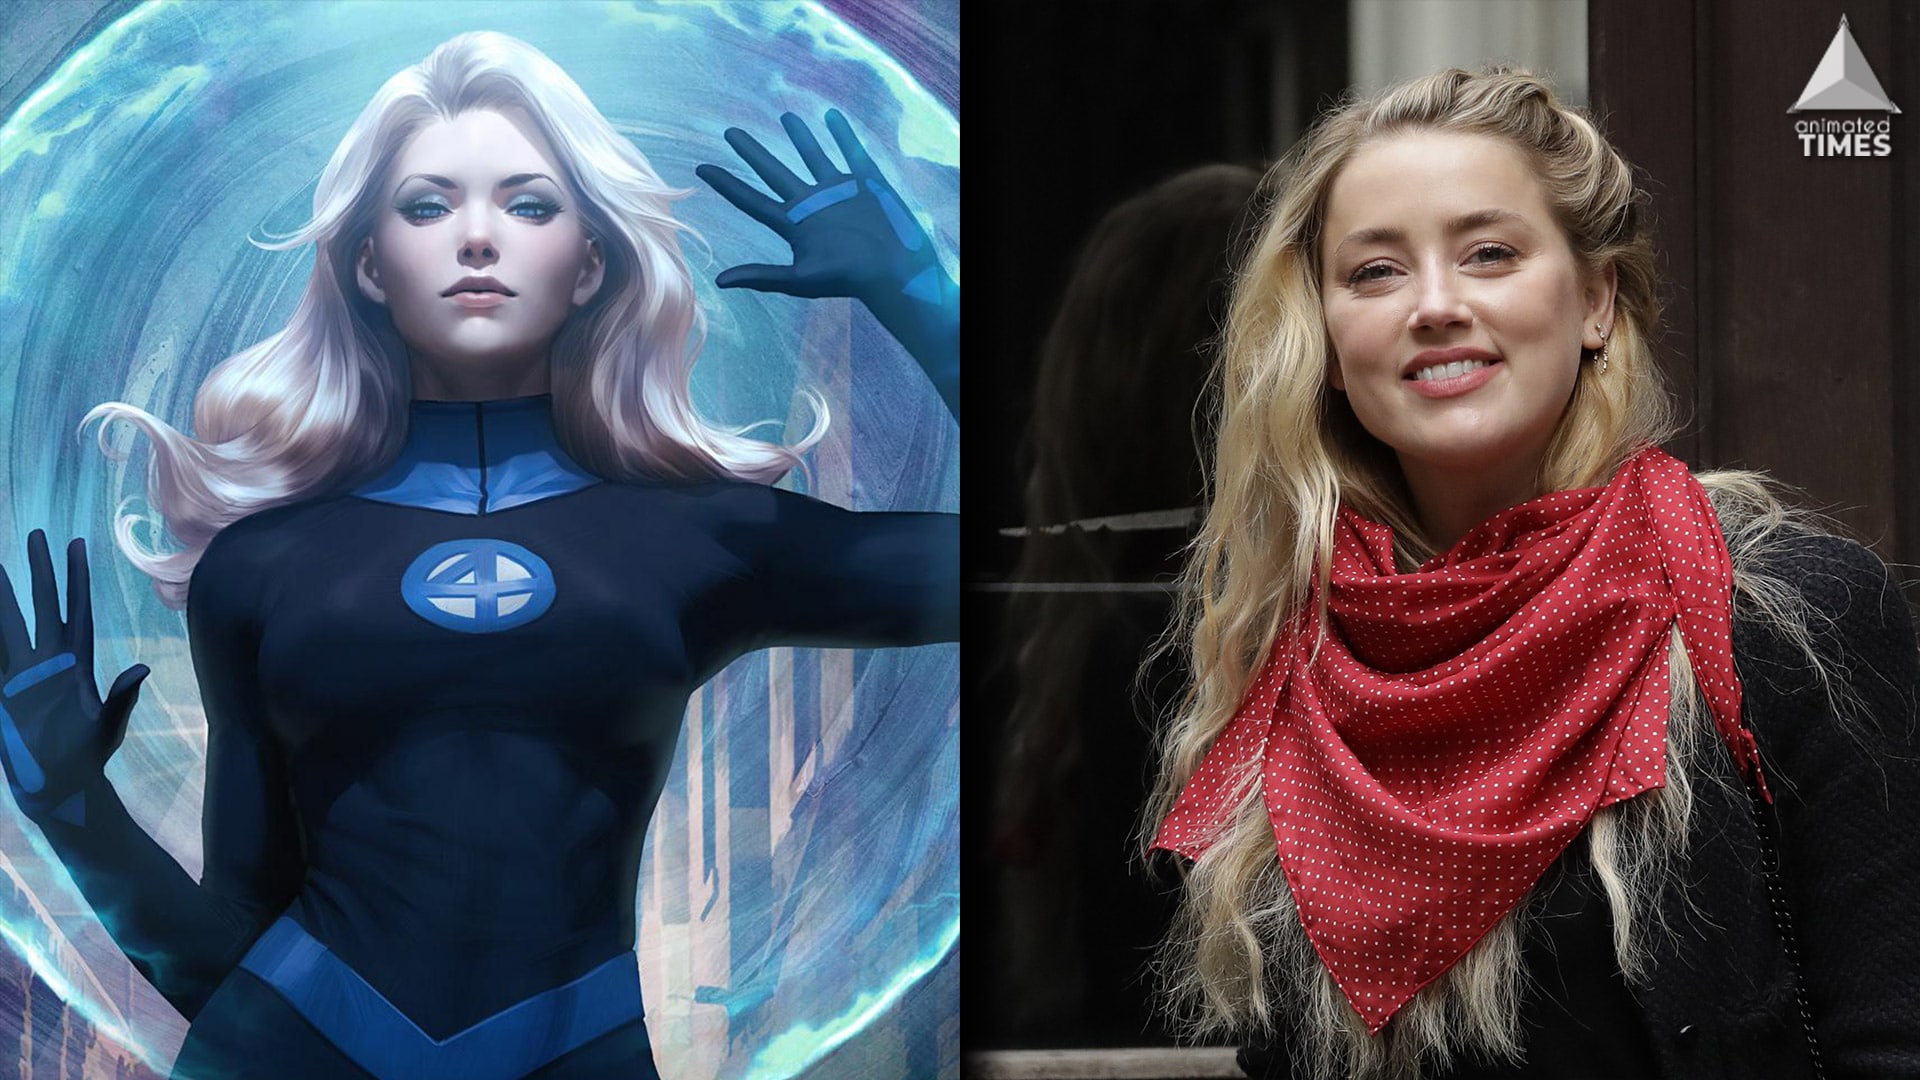 MCU Rumor: Amber Heard To Star In Fantastic Four As Invisible Woman